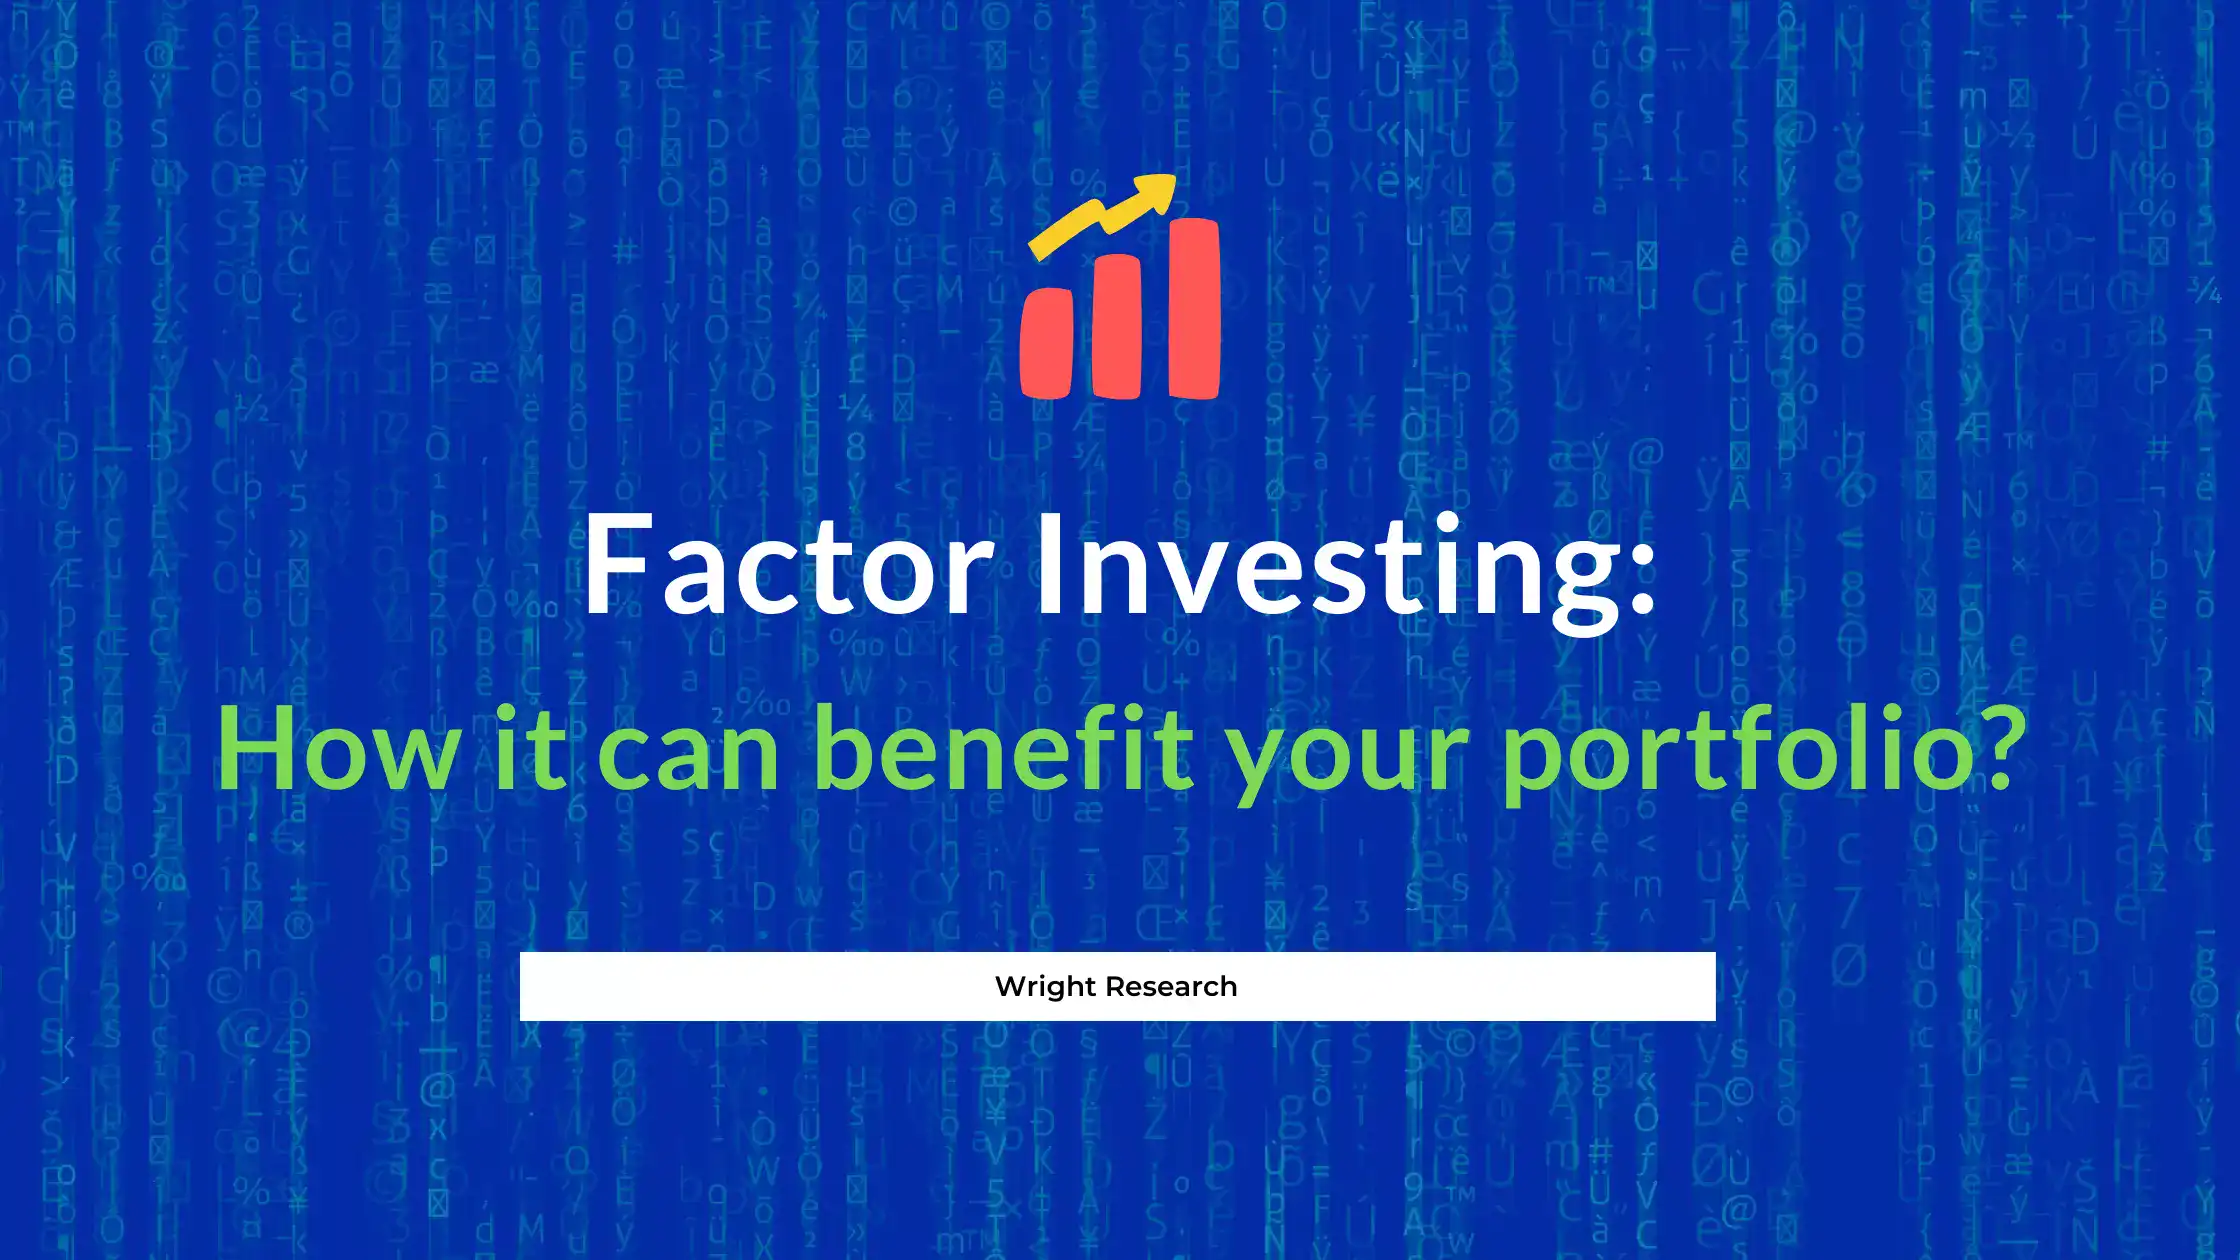 Heard about Factor Investing? Know how it can help in long term investing?